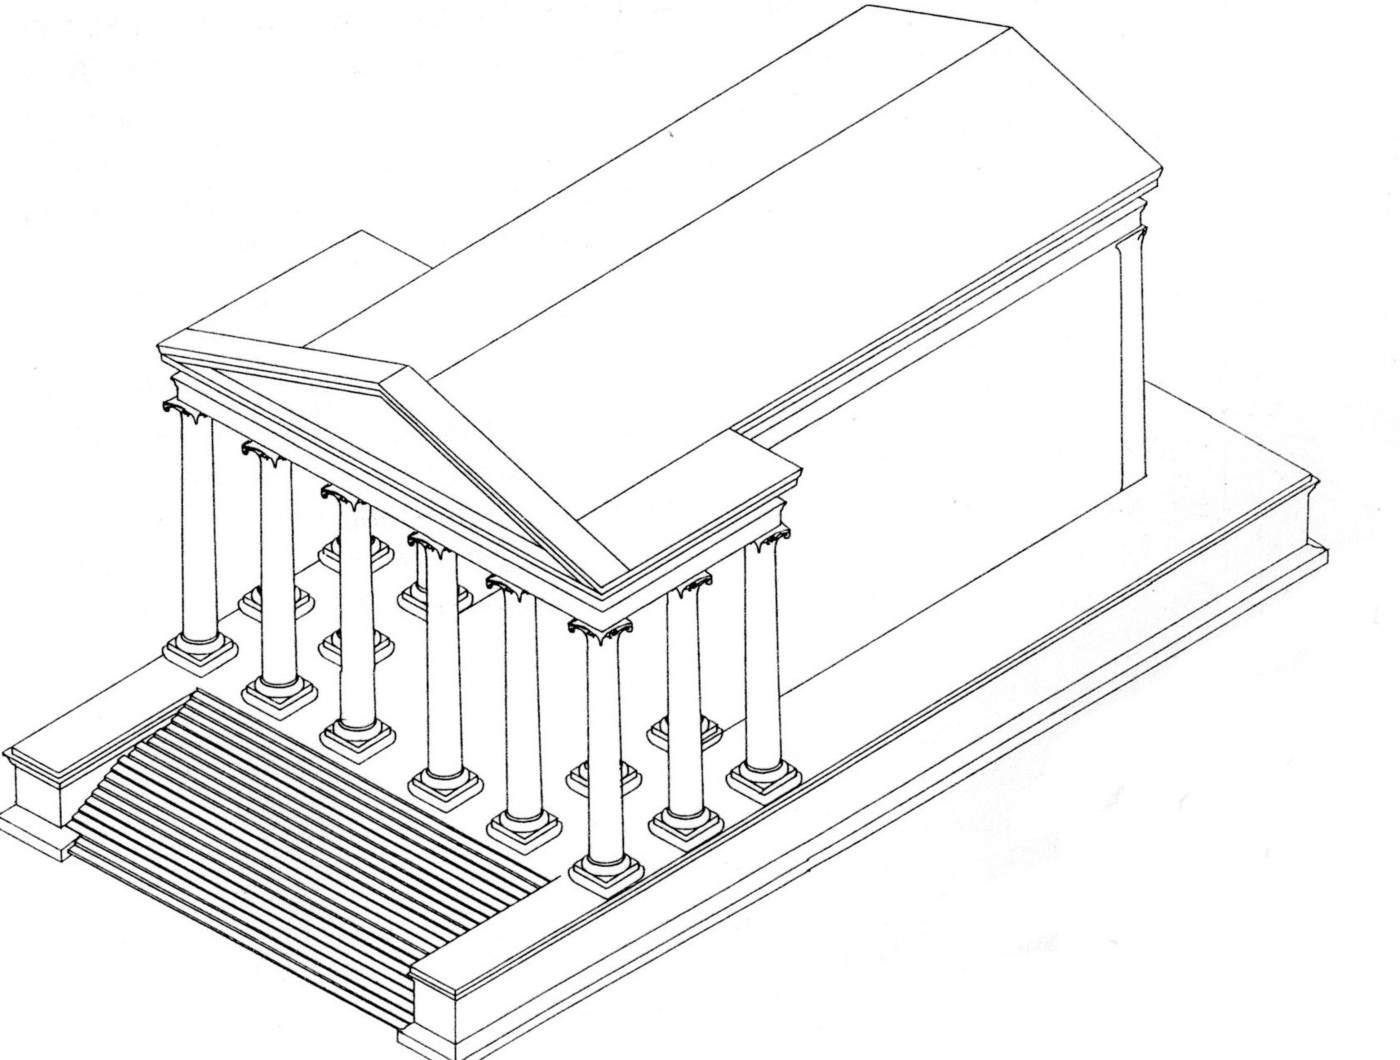 A reconstruction of what the Roman temple on the Amman Citadel may have originally looked like. Drawing by Chrysanthos Kannelopoulos.